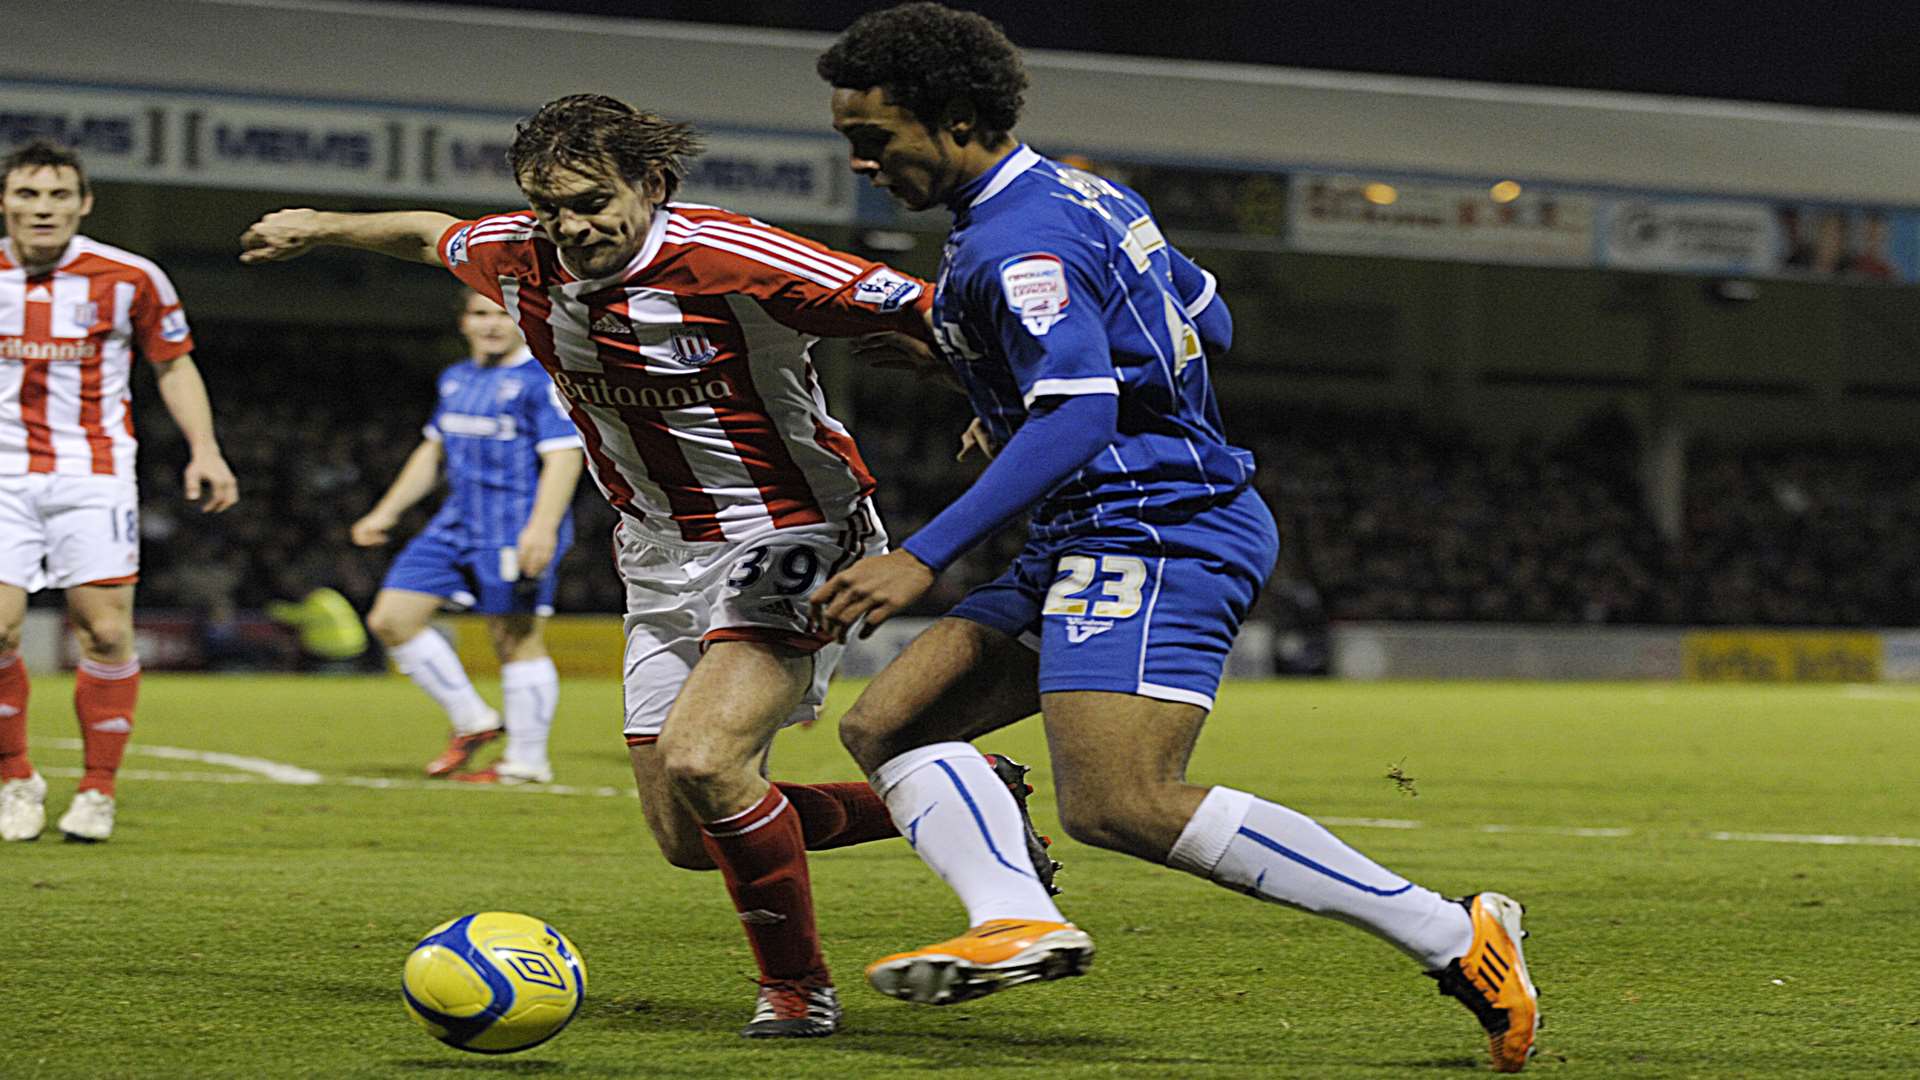 Stefan Payne in action for Gillingham in the FA Cup third round clash against Stoke City in 2012. Picture: Barry Goodwin